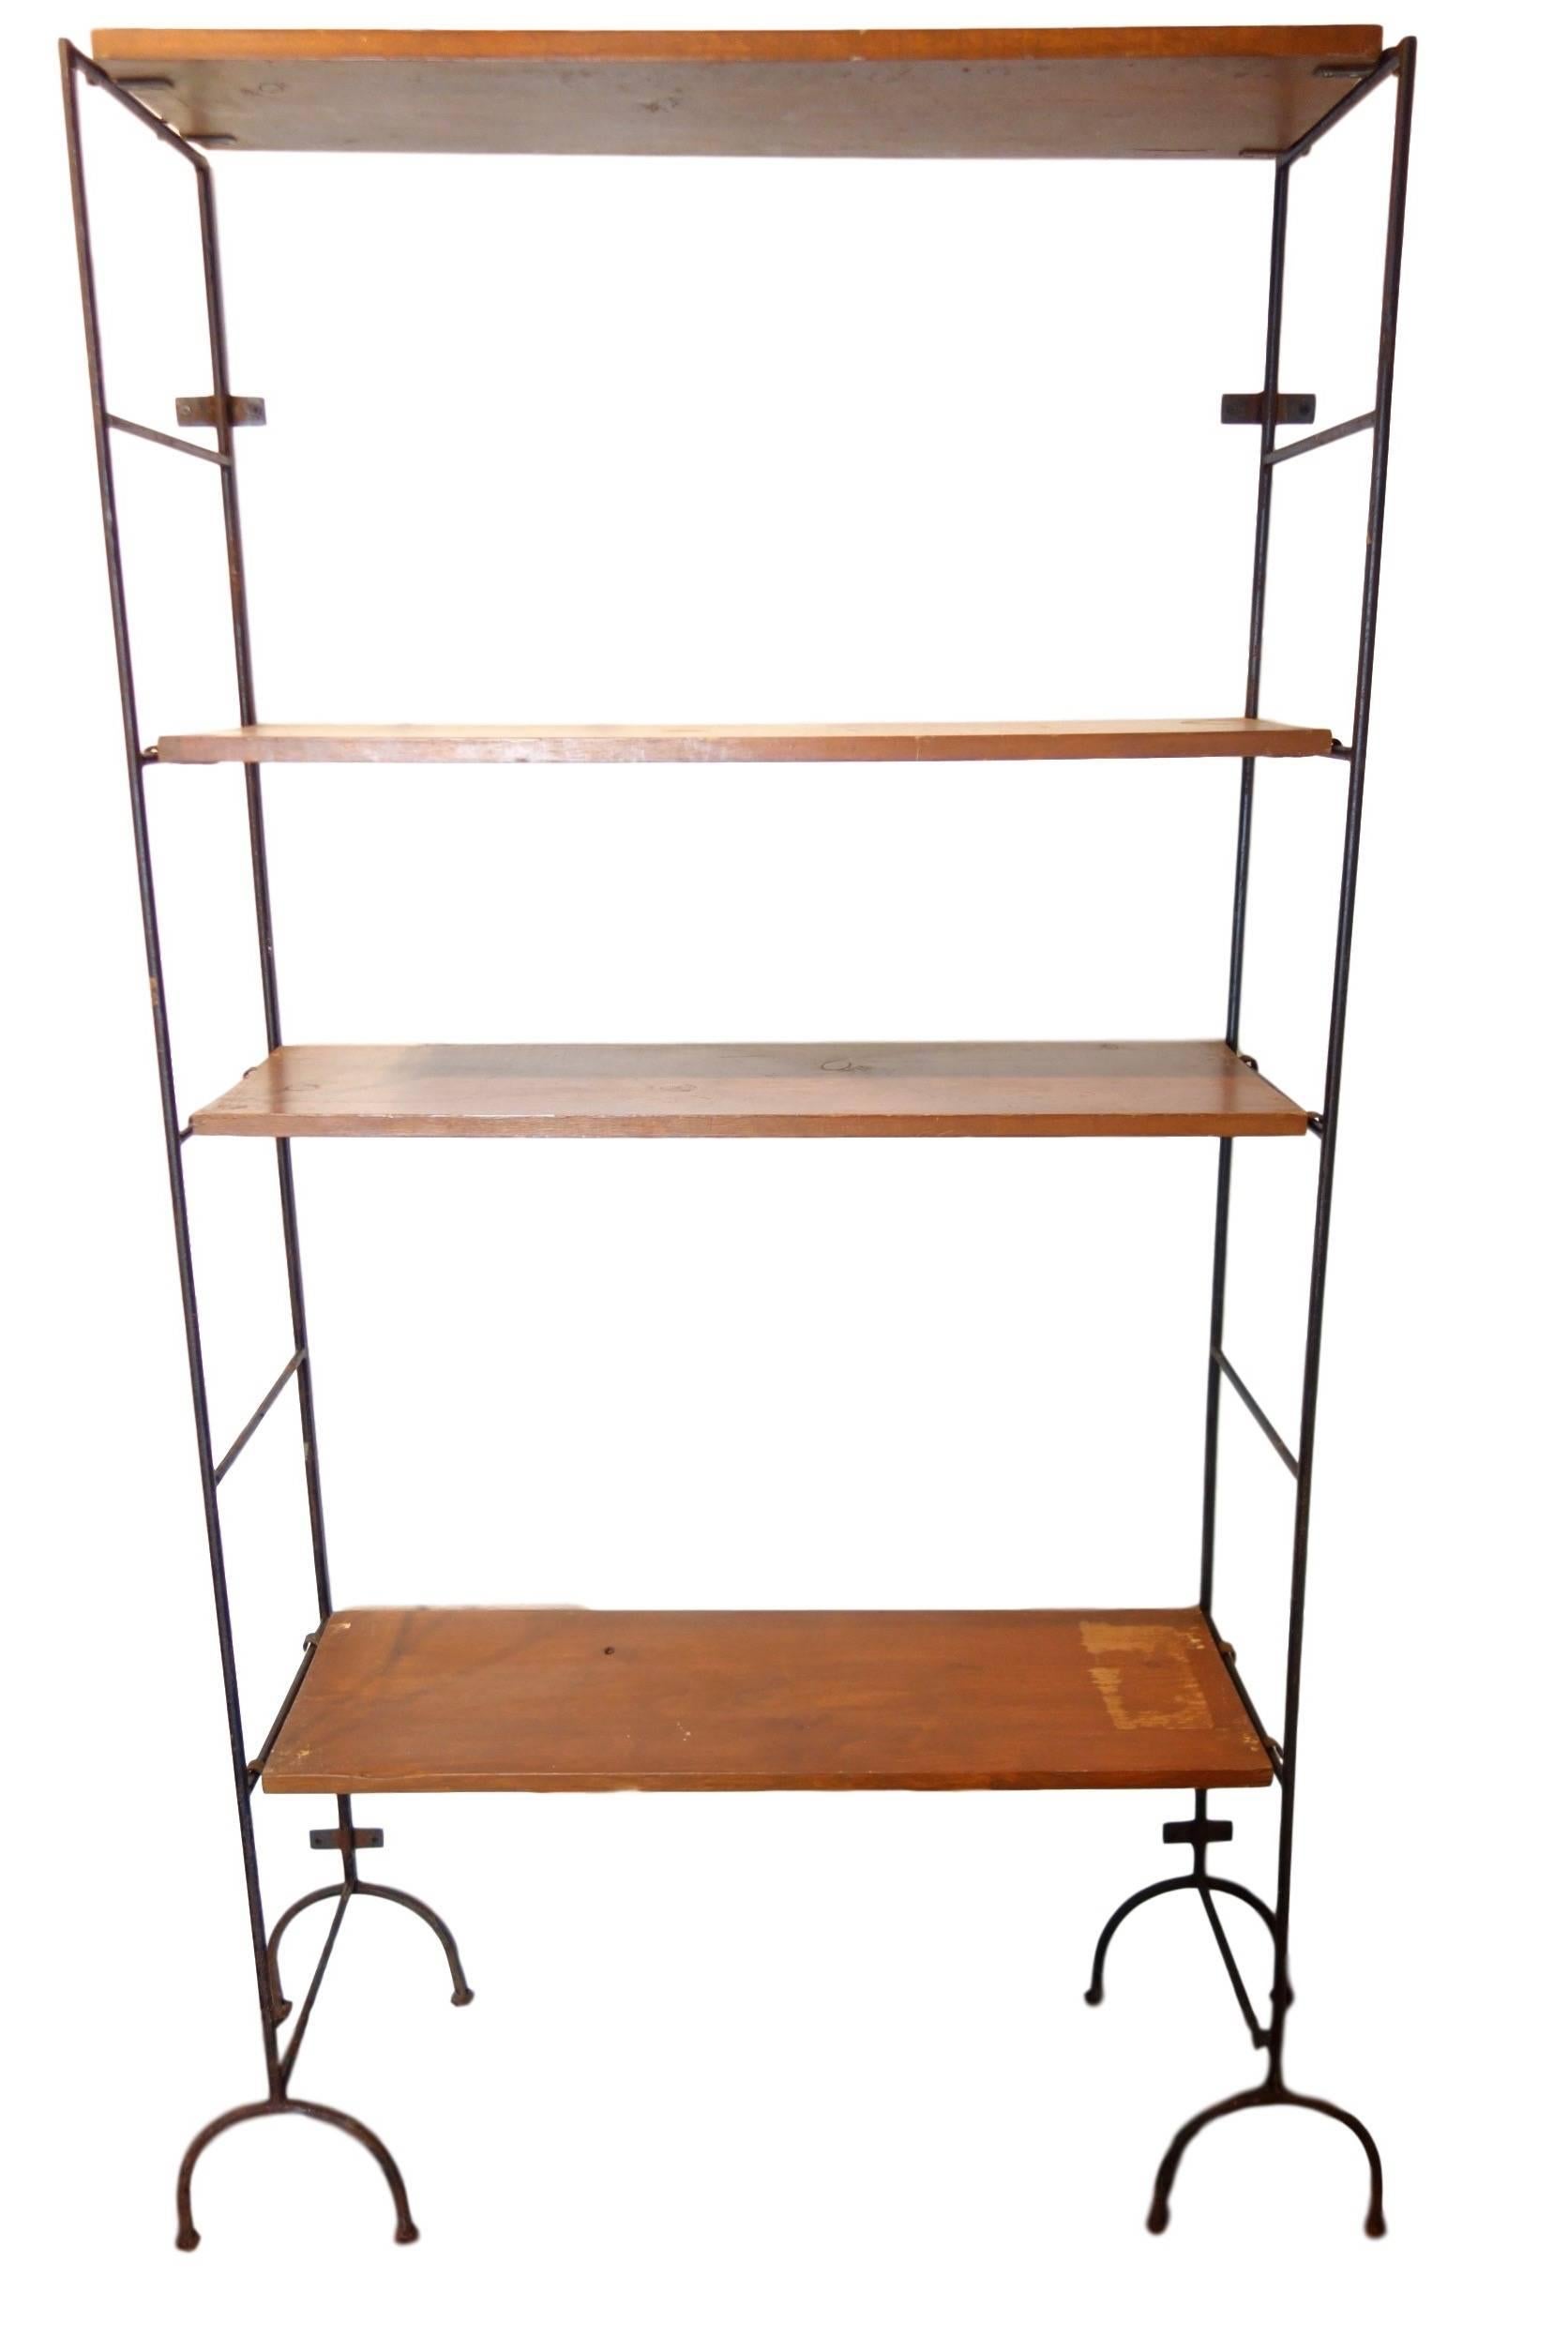 This is a pair of iron and wood modular shelves with unique Curule legs. Hardware on the backside of the frame secure the shelves to the wall. Each shelf has iron hardware on the ends allowing you to adjust the shelves to the desired height. 

  